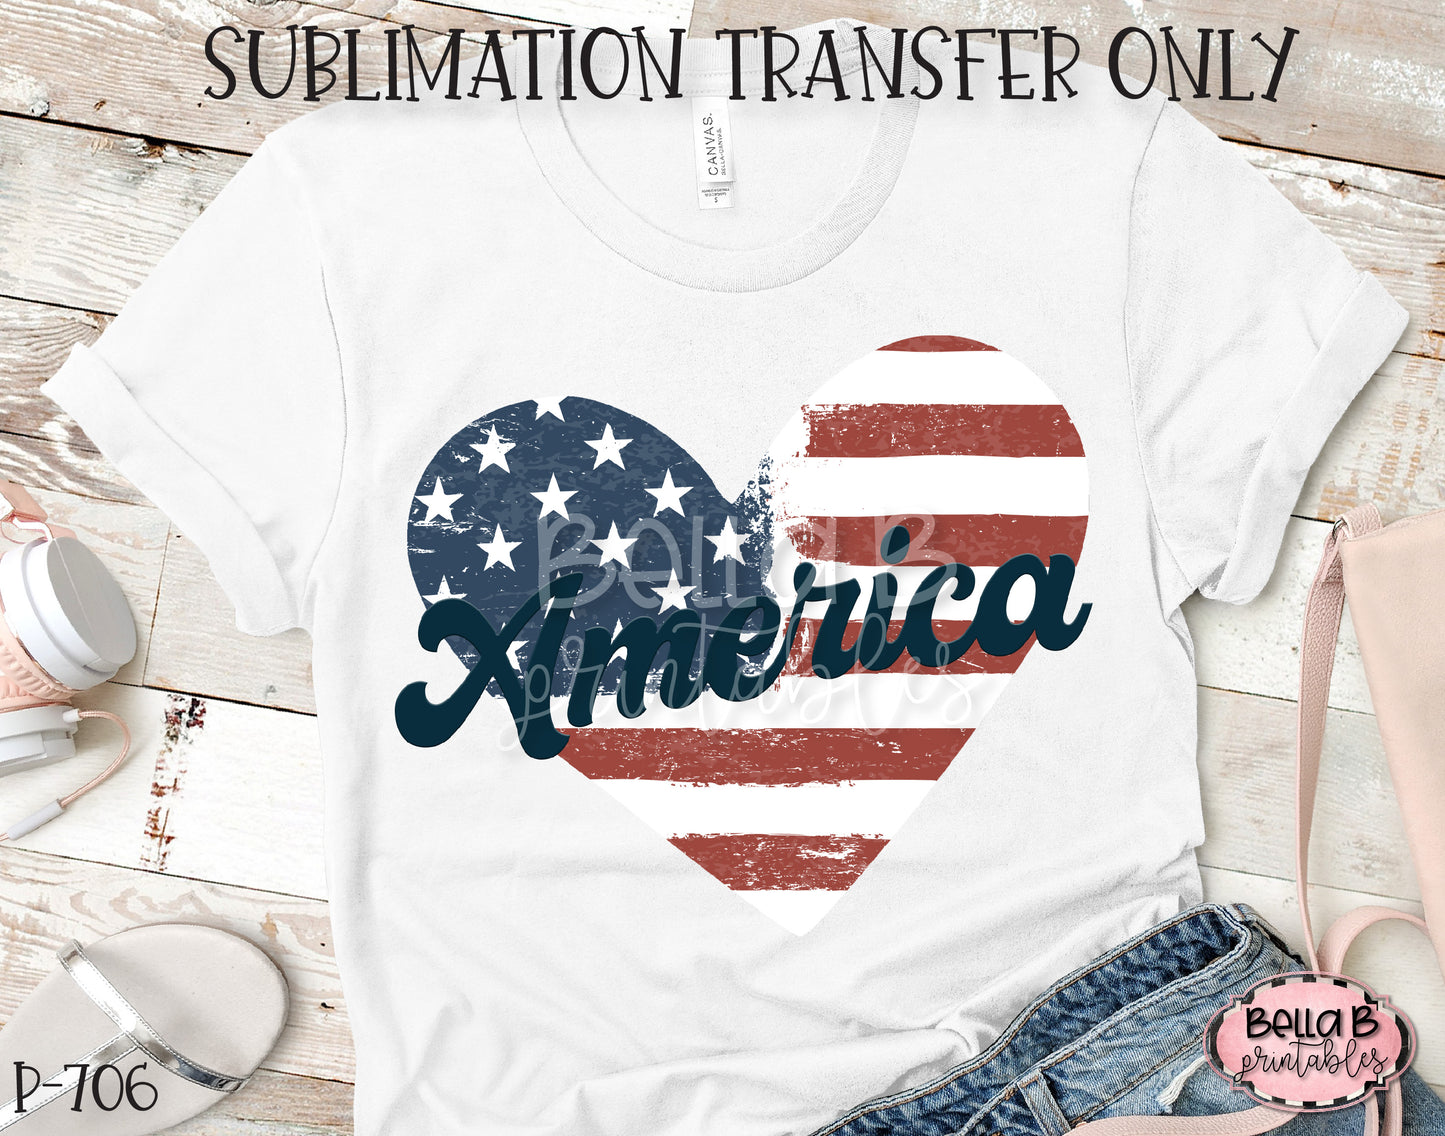 America Distressed Heart Sublimation Transfer, Ready To Press, Heat Press Transfer, Sublimation Print